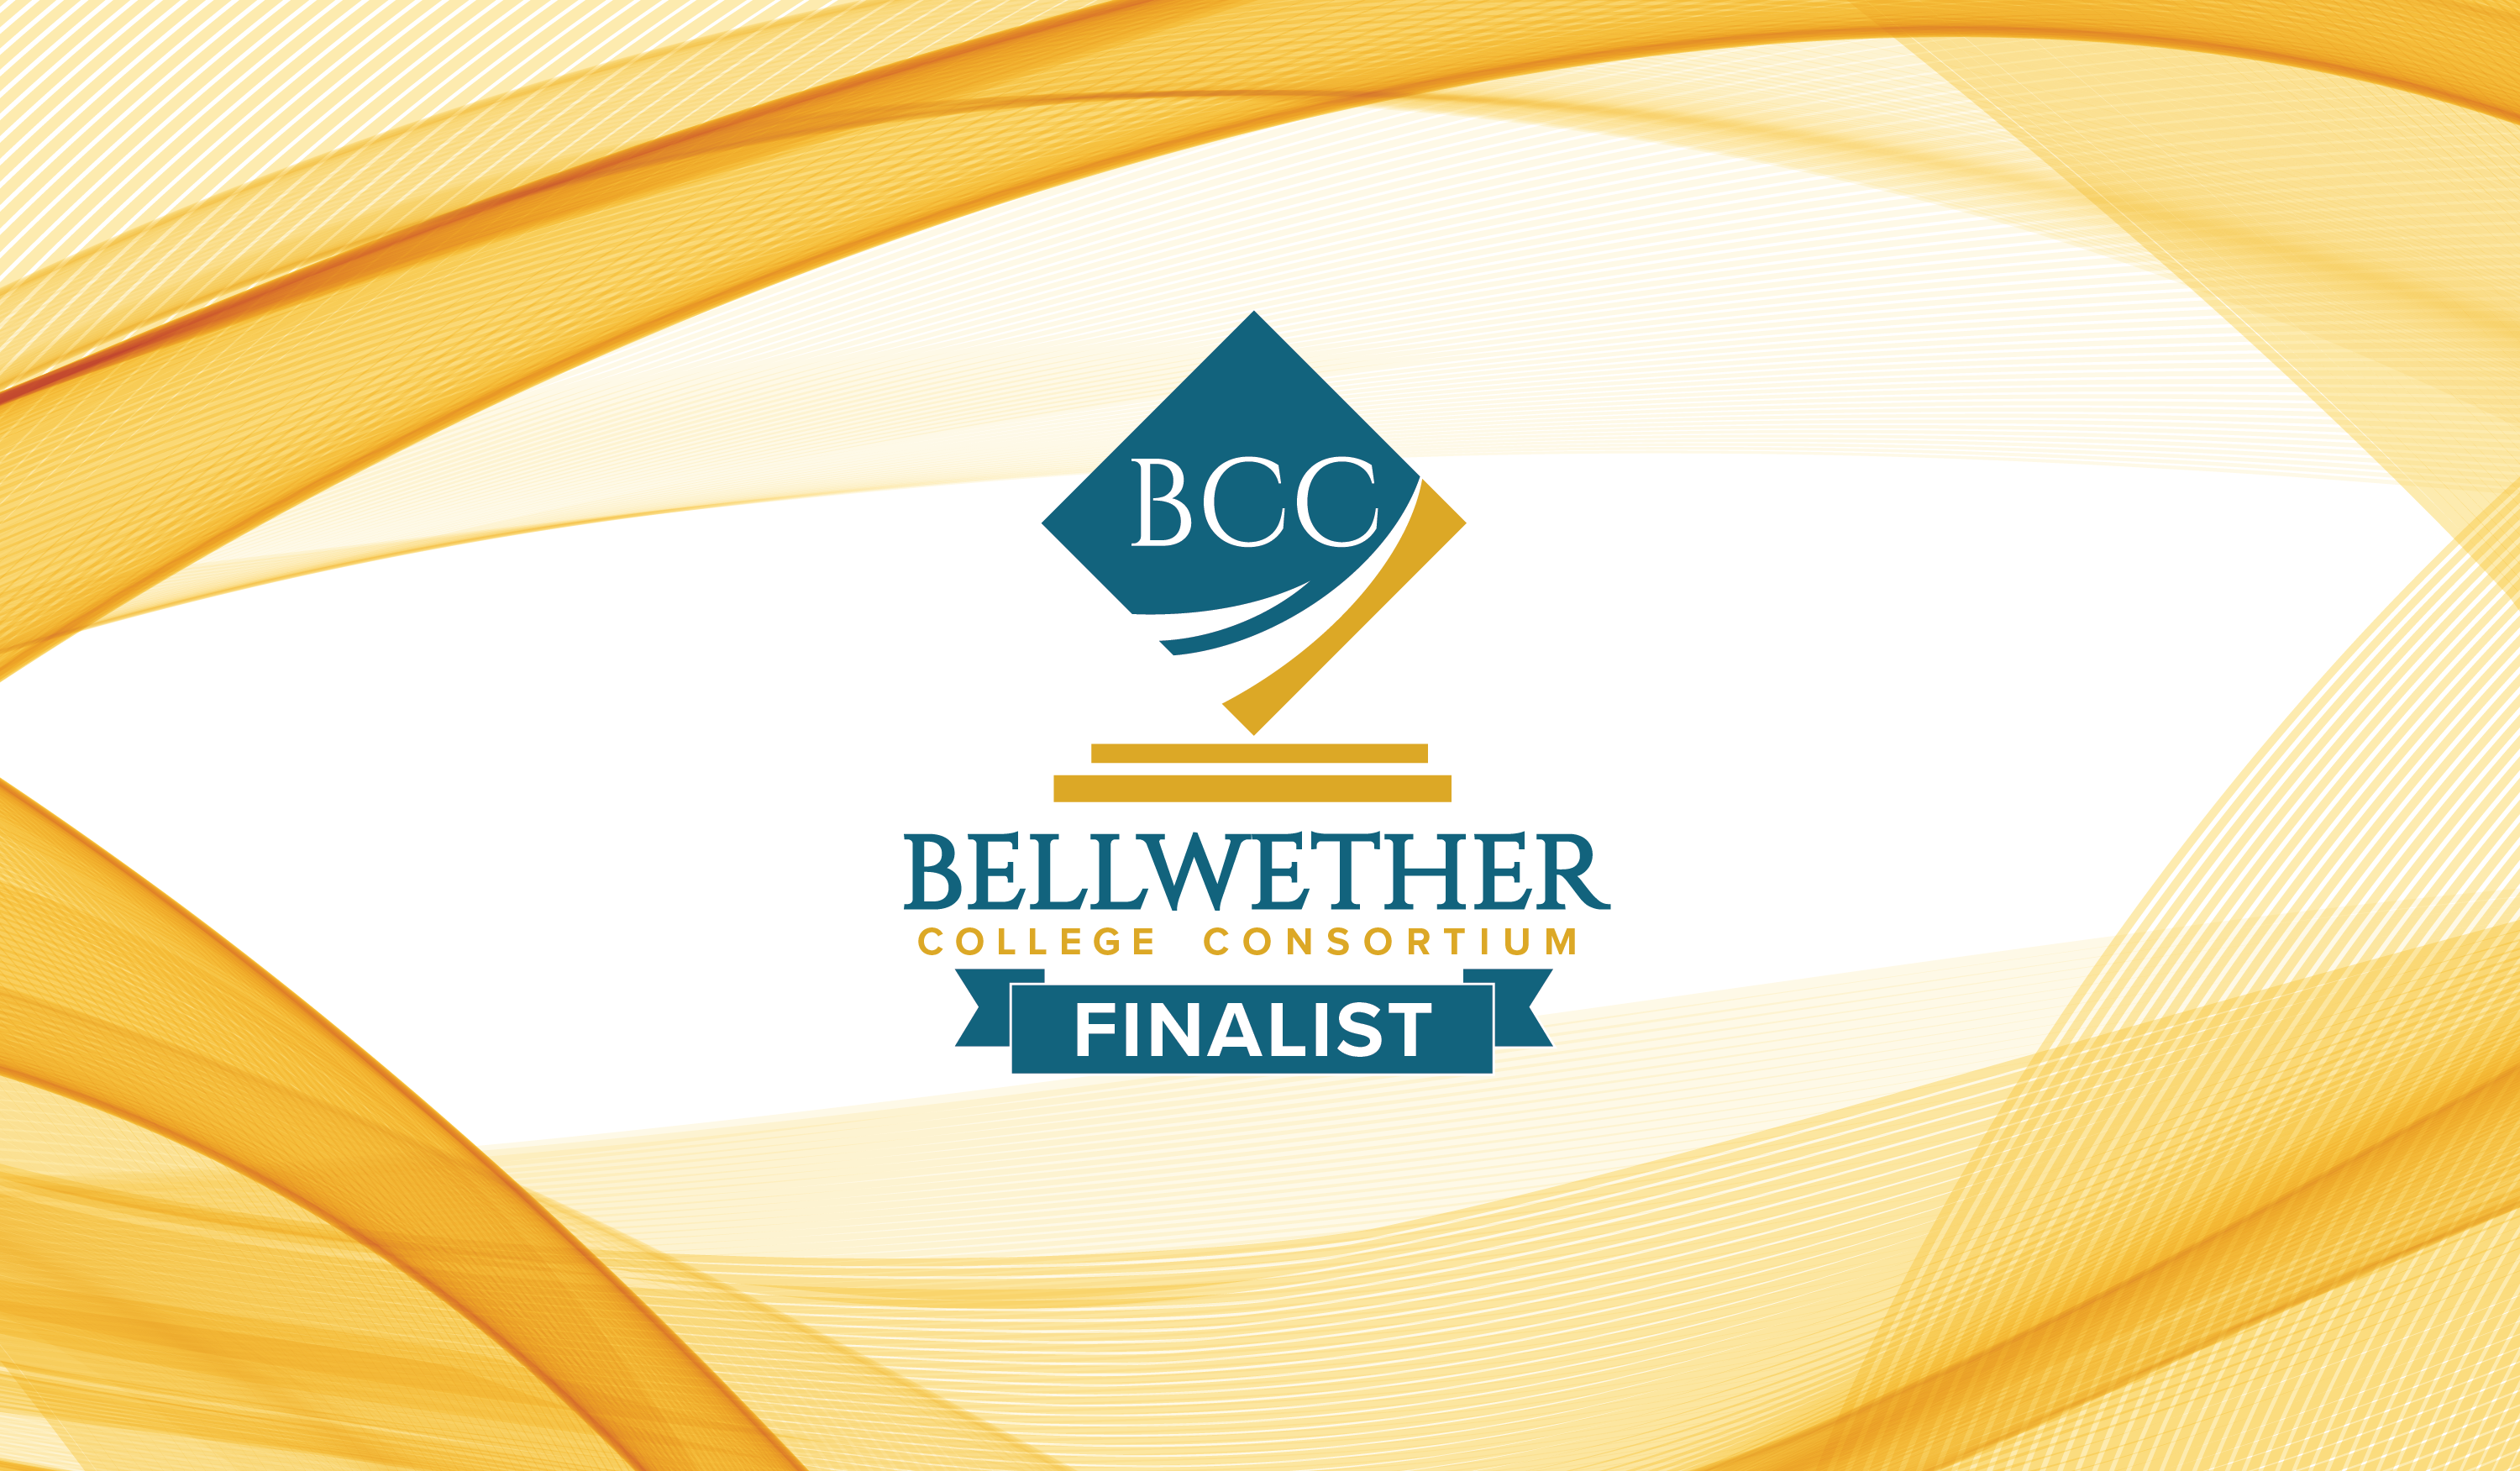 Bellwether college consortium finalist with bellwether logo